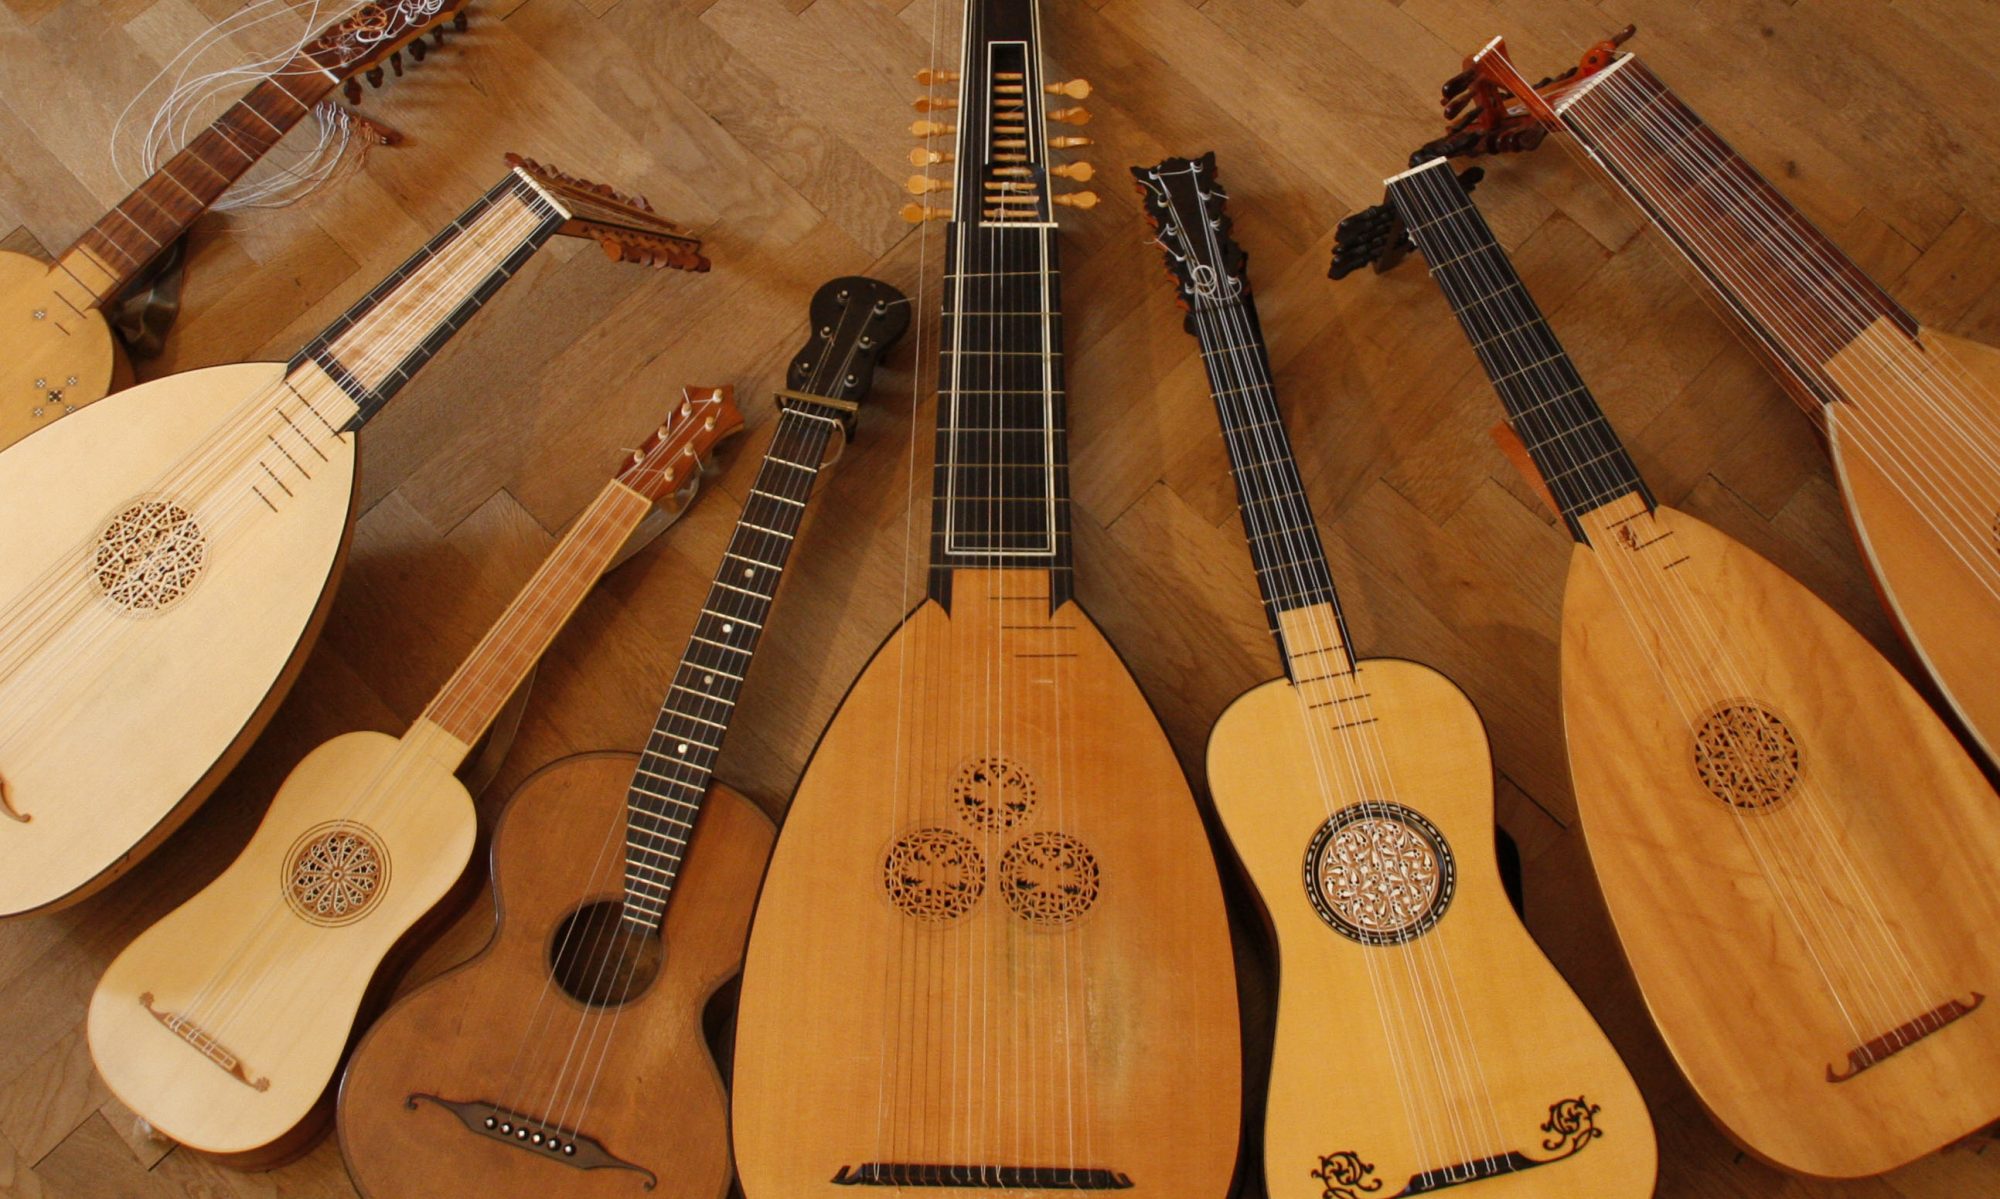 Lutes, Guitars, Telescopes and more